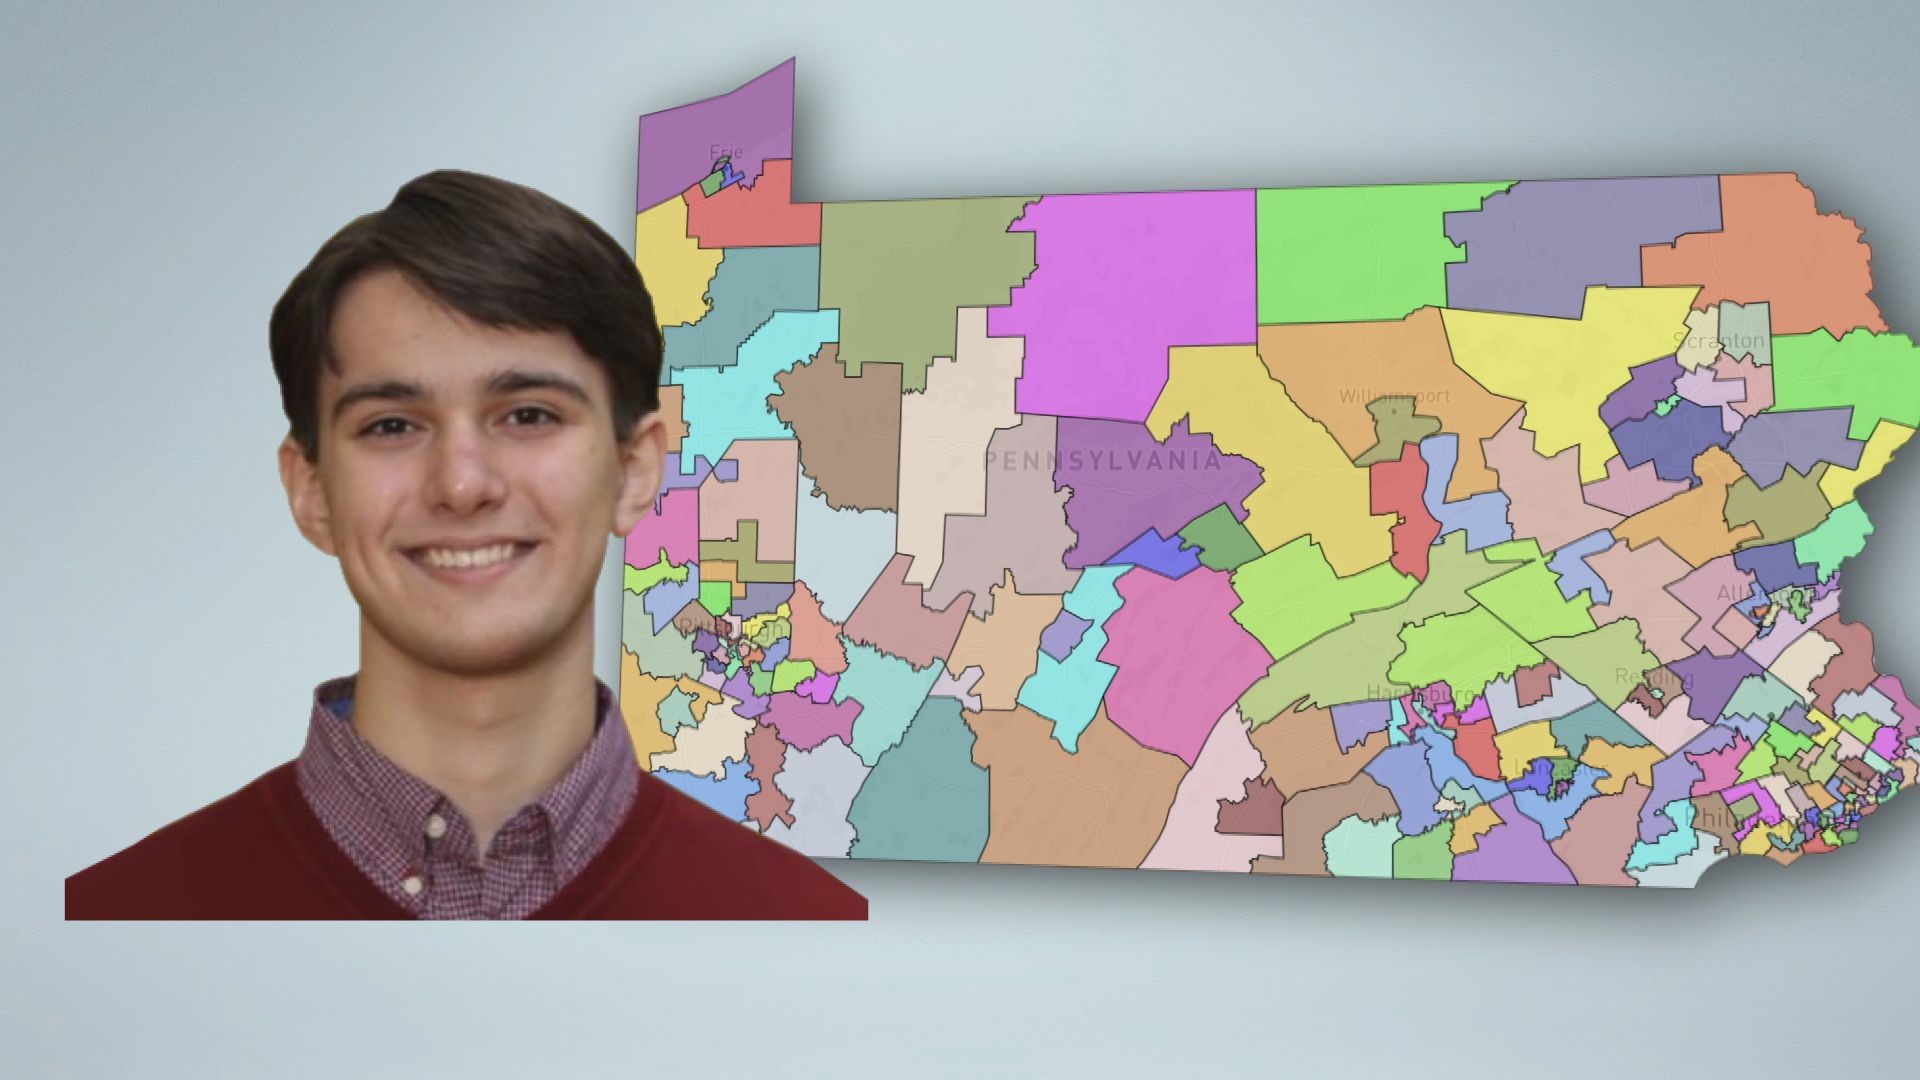 Northeastern graduate Jacob Moser, 18, was one of five people recognized by Fair Districts PA for his map design of future State House seats.